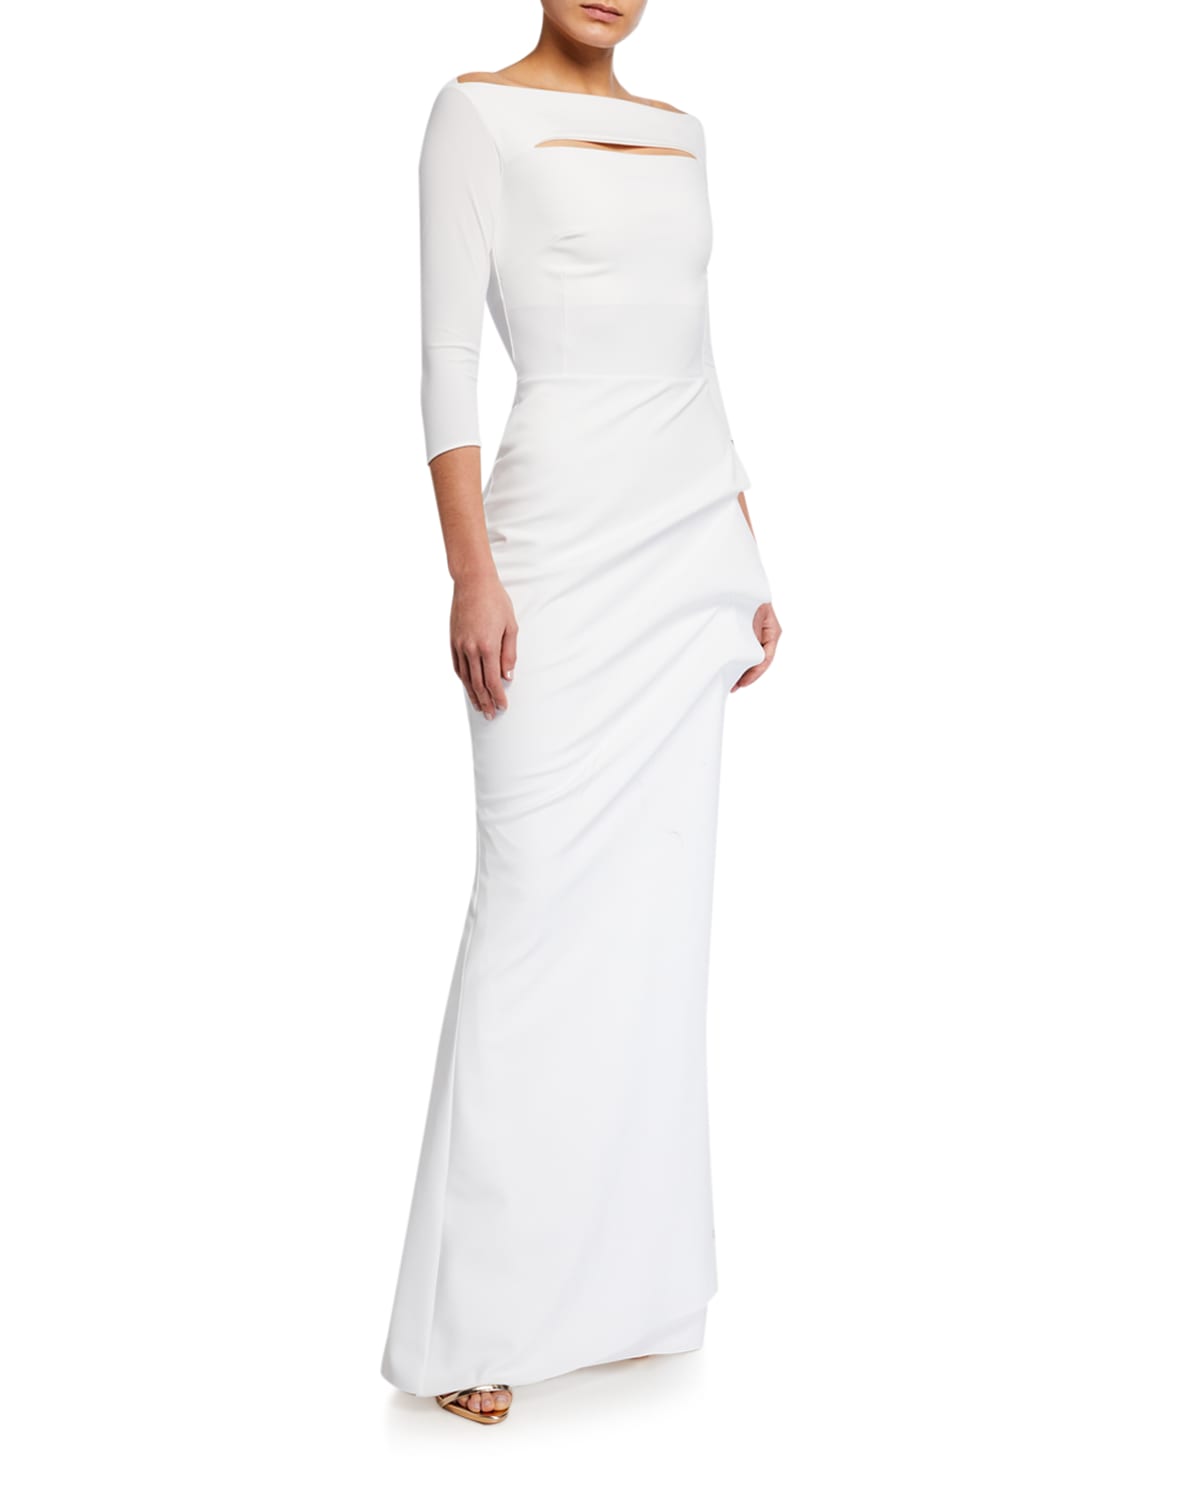 White Evening Gown | Neiman Marcus